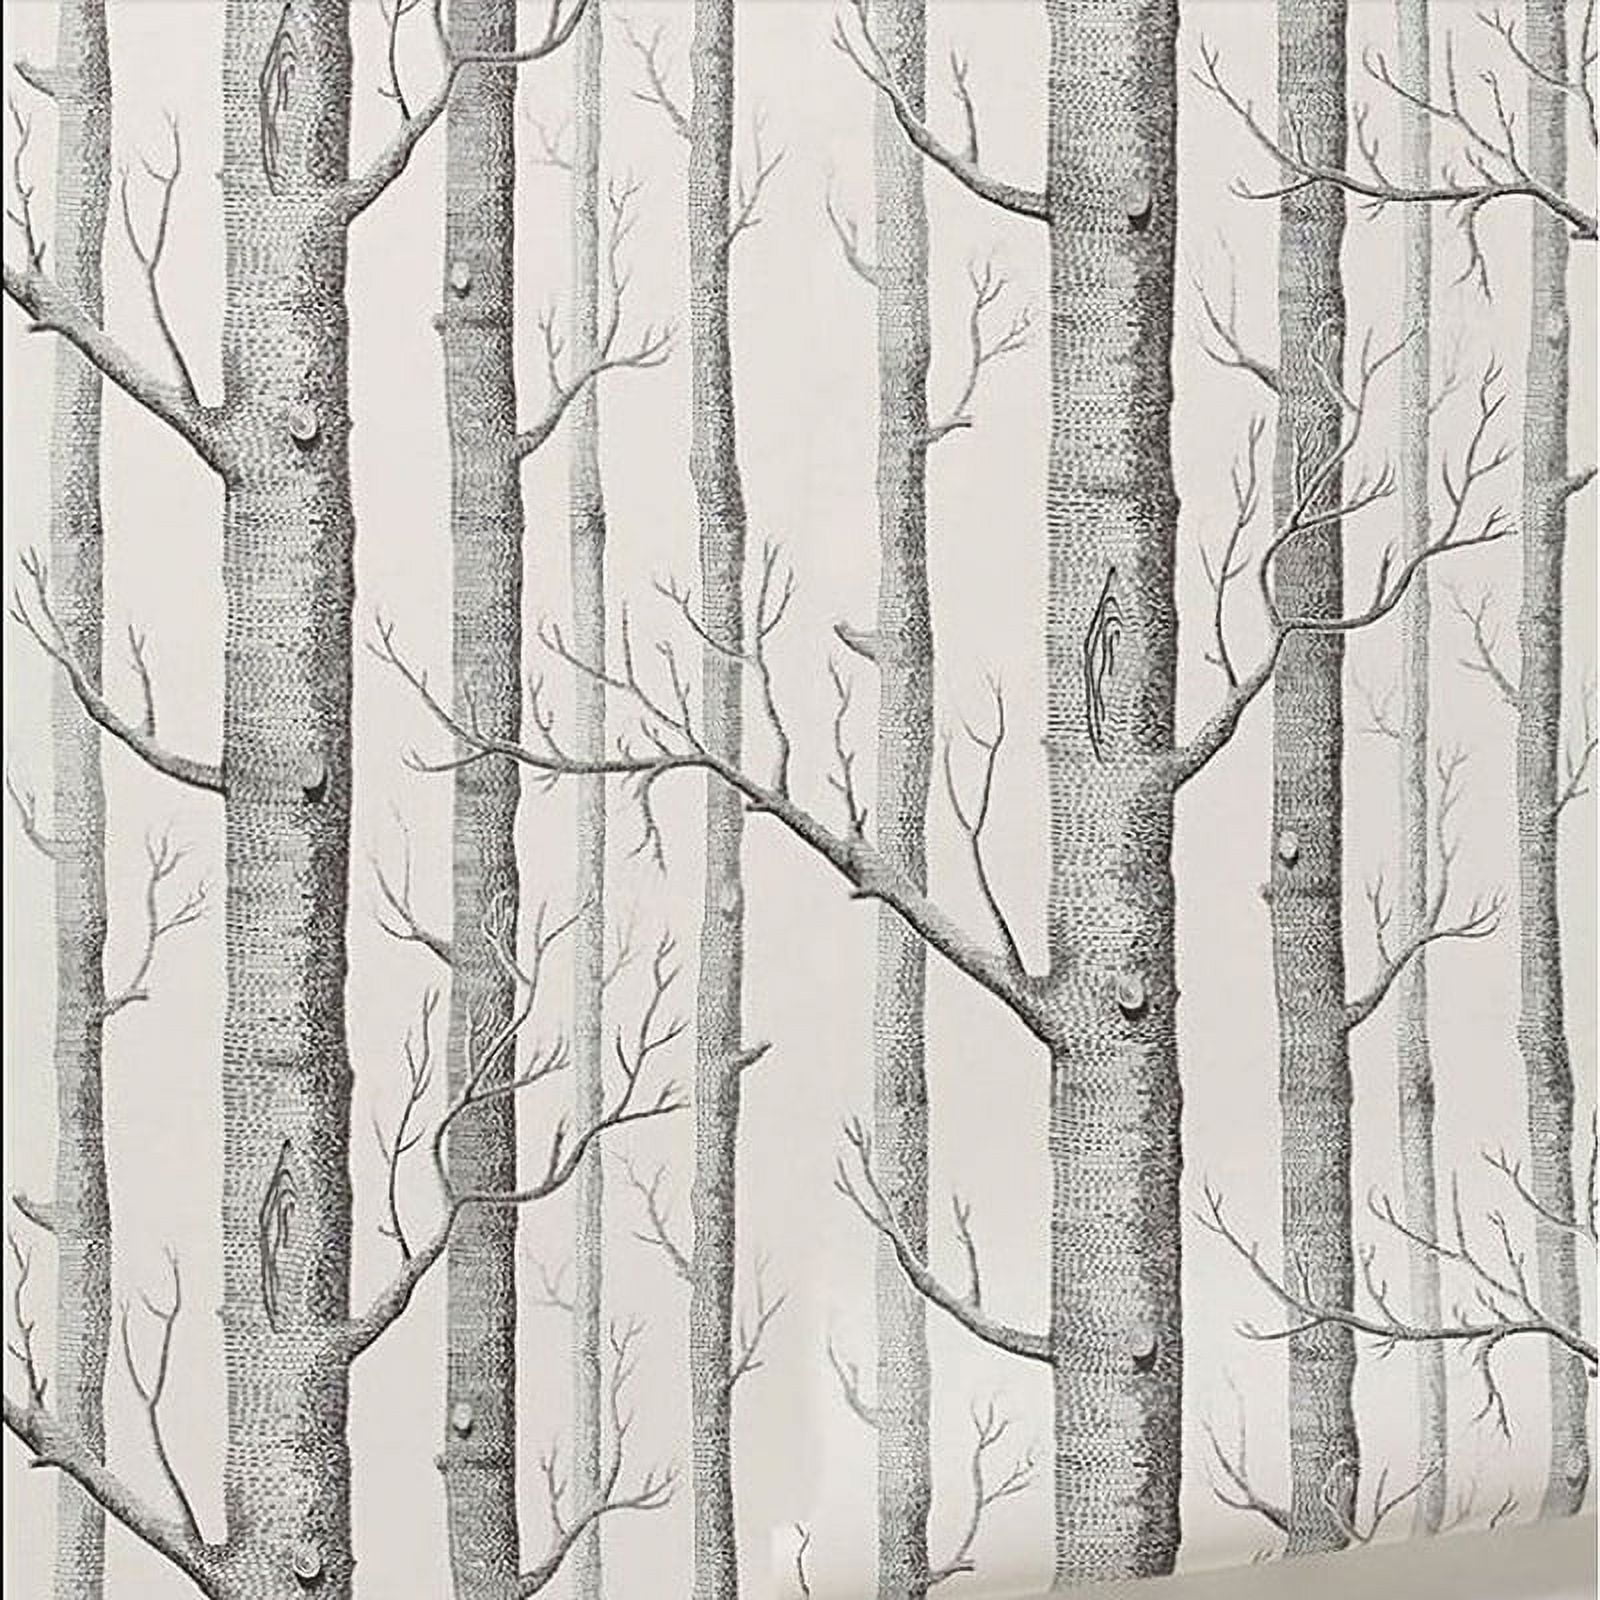 Alexsix Birch Tree Wallpaper Modern Decor Wall Paper Roll Forest Wood  Wallpapers for Bedroom Living Room